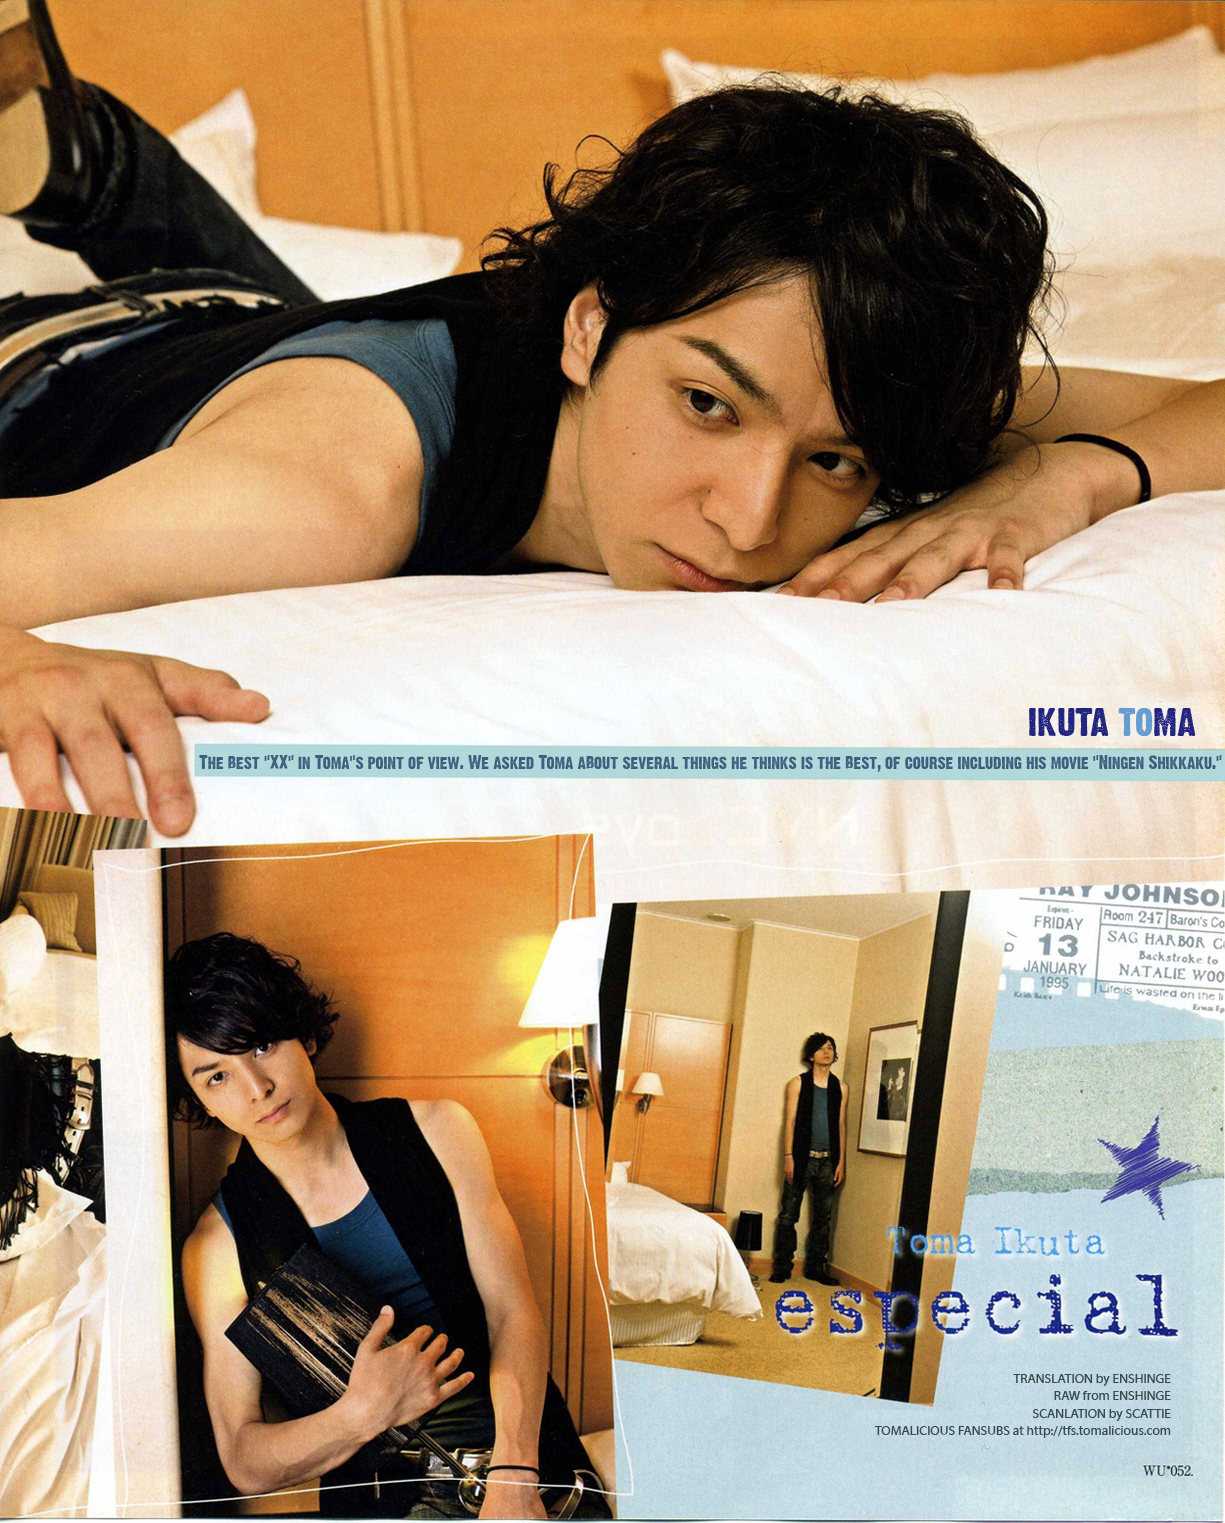 TFS Wink Up Sep 09 Toma Pg 1